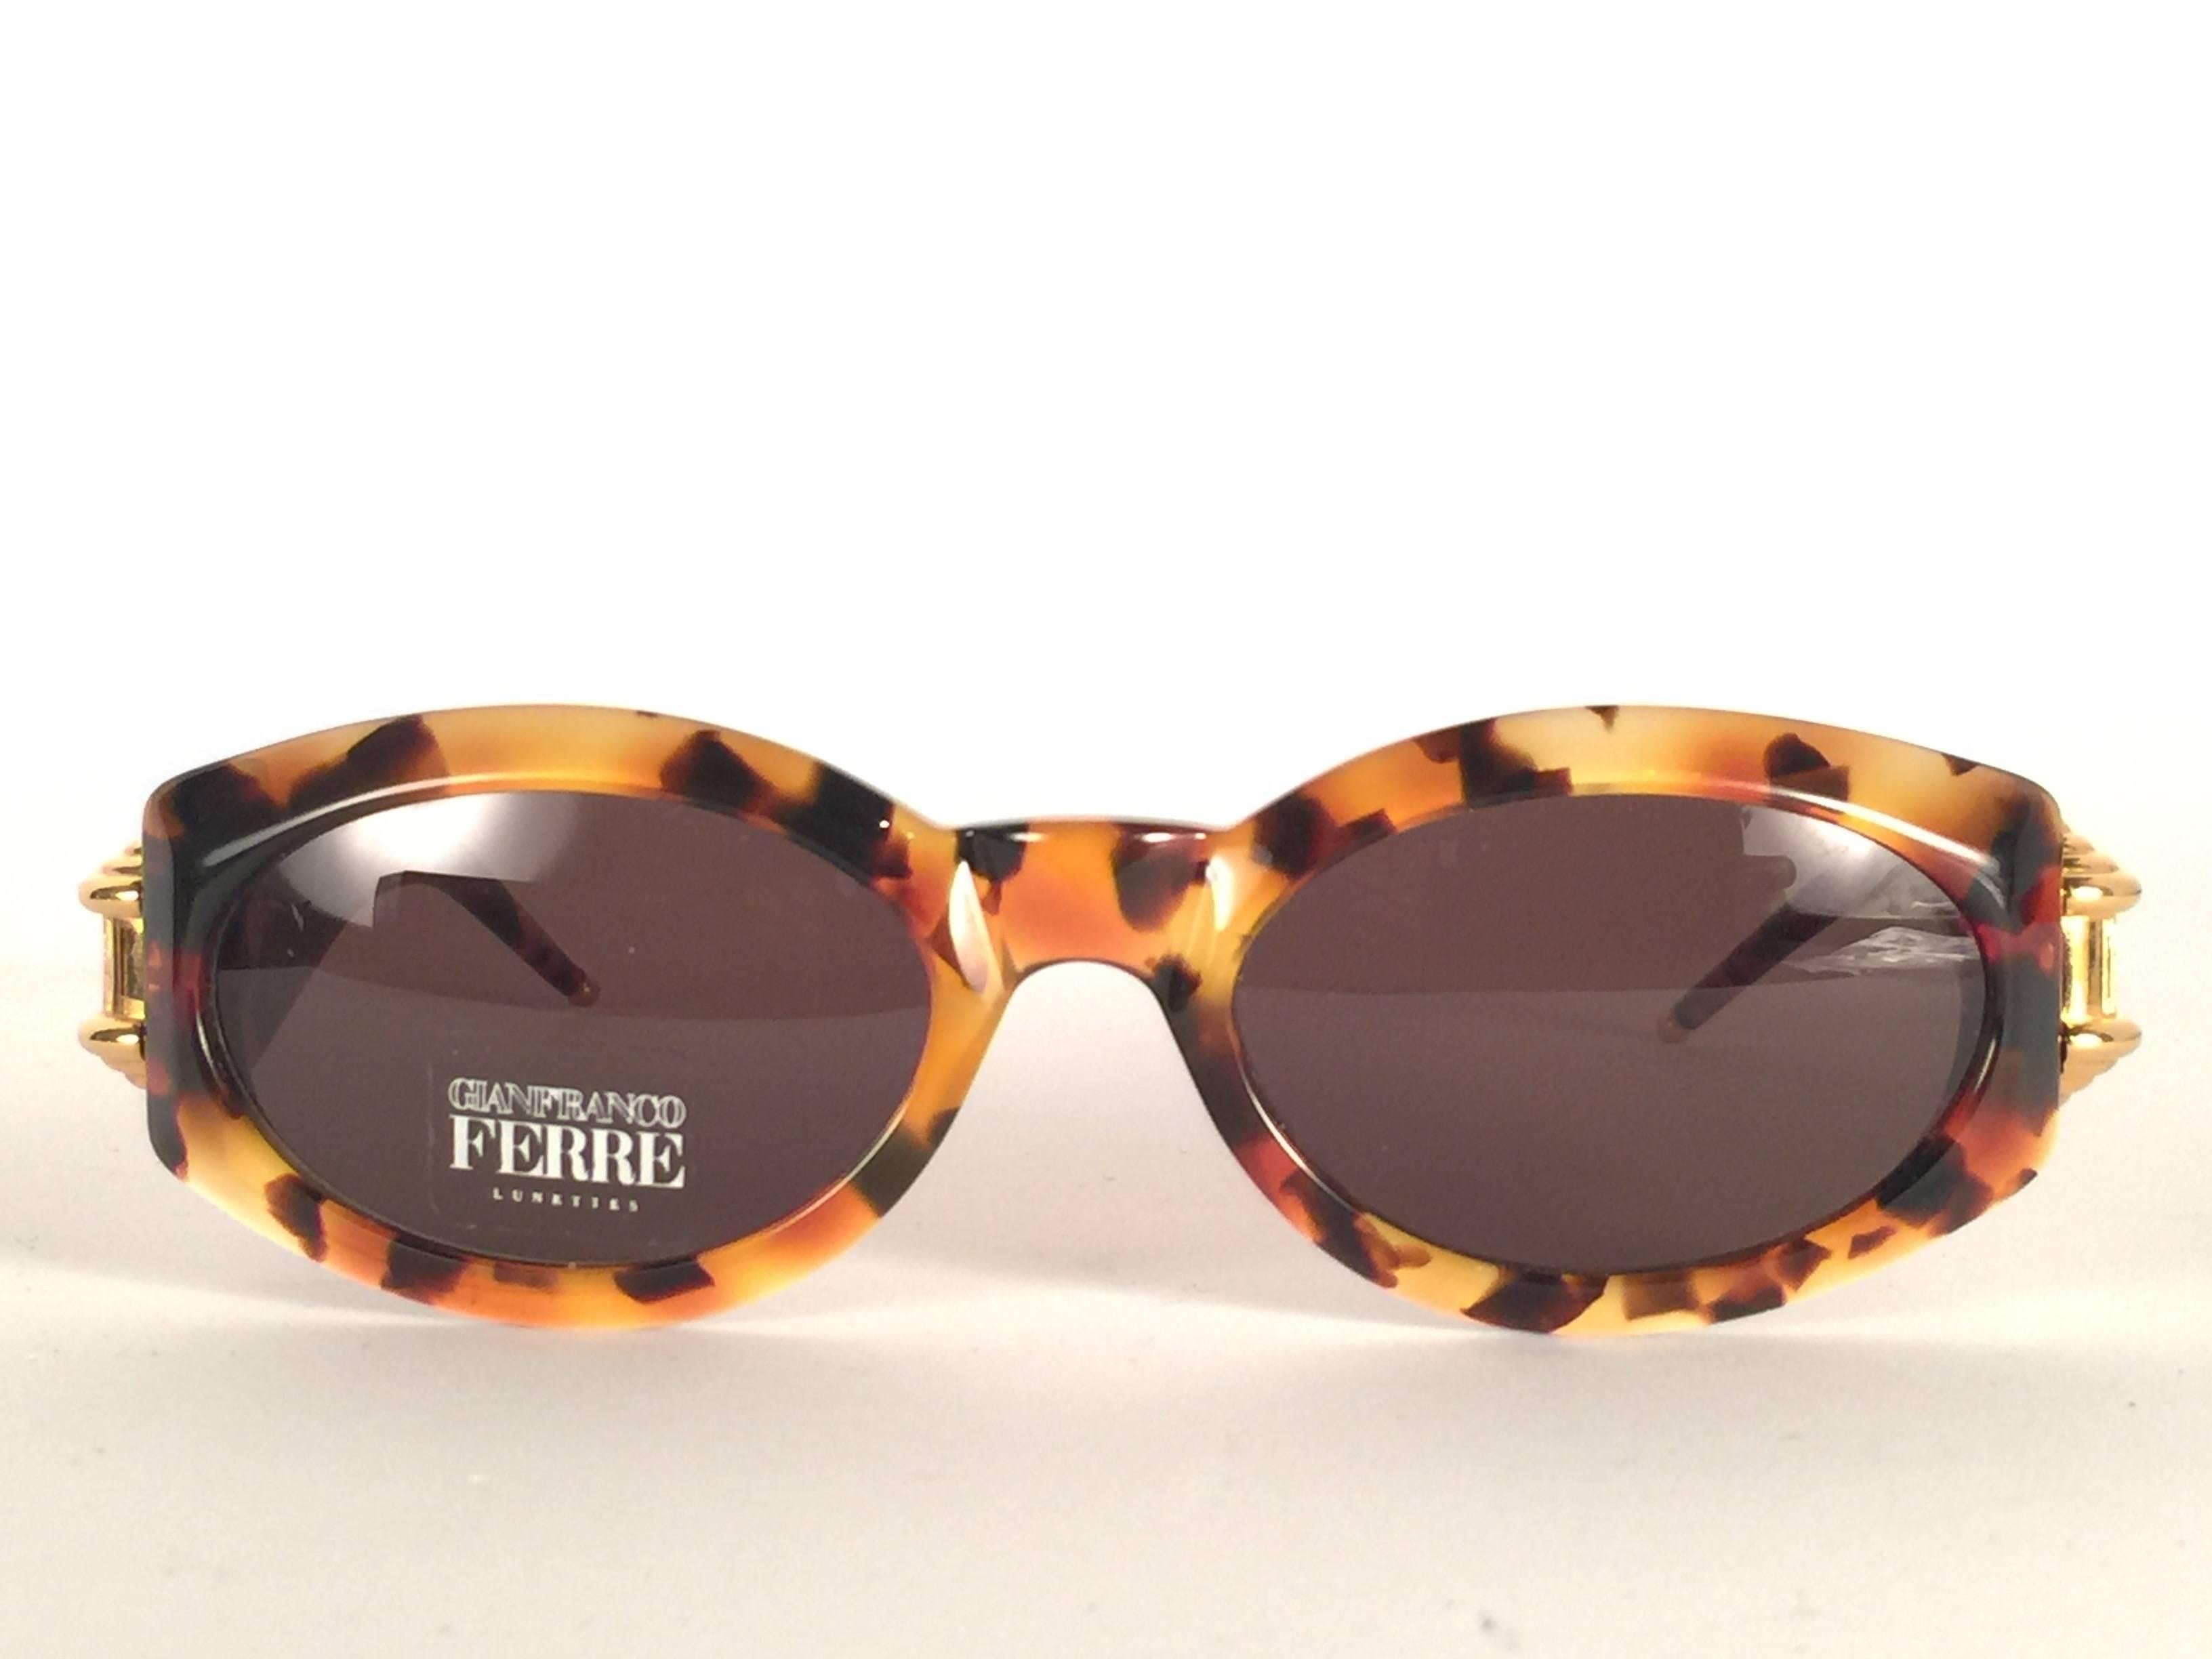 New vintage Gianfranco Ferre sunglasses.    

Tortoise with gold details frame holding a pair of spotless grey lenses.   

New, never worn or displayed. 

 Made in Italy.